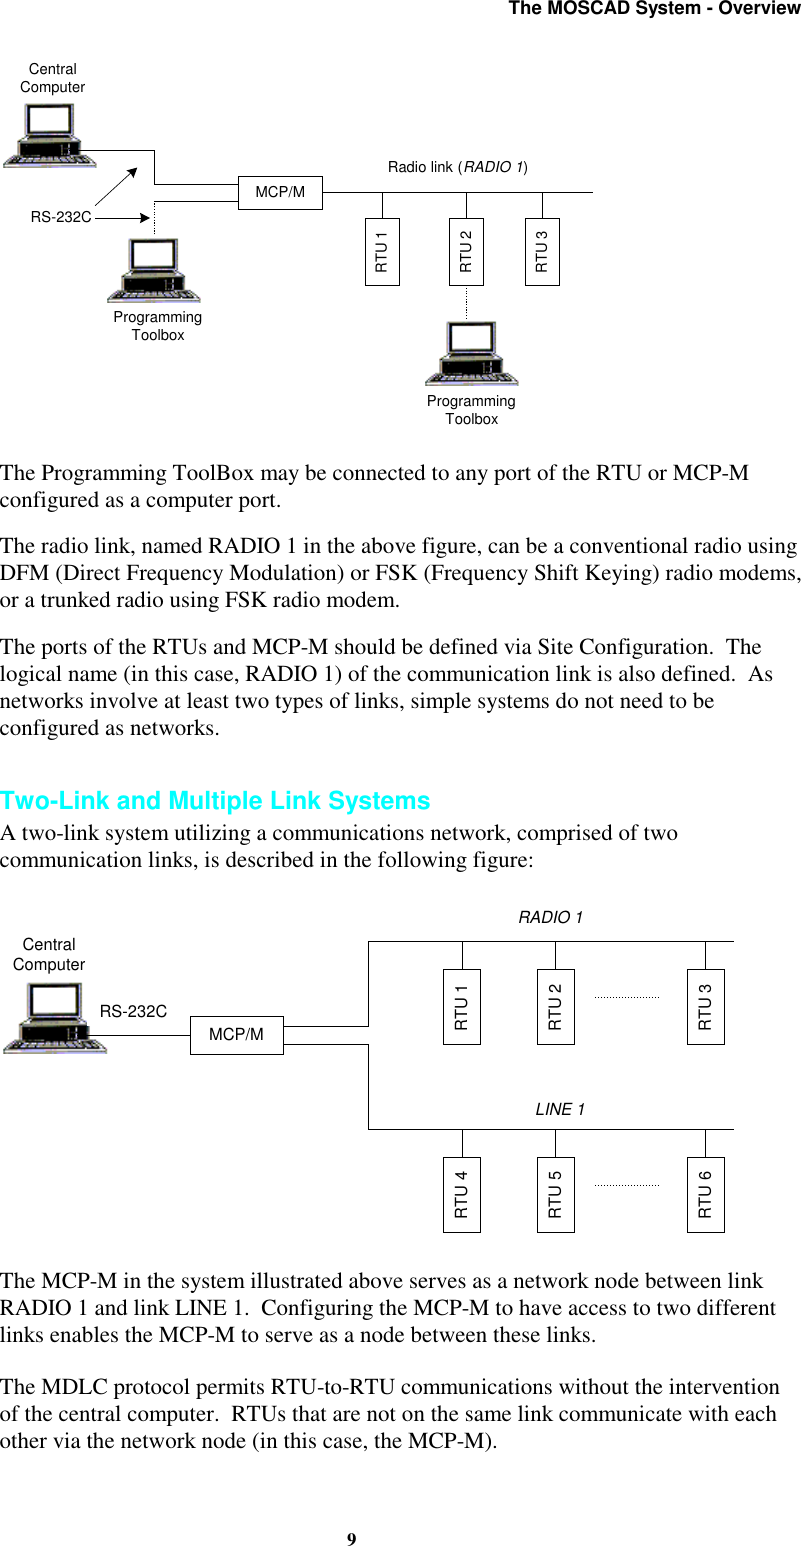 The MOSCAD System - Overview9ProgrammingToolboxMCP/MCentralComputerProgrammingToolboxRTU 1RTU 2RTU 3RS-232CRadio link (RADIO 1)The Programming ToolBox may be connected to any port of the RTU or MCP-Mconfigured as a computer port.The radio link, named RADIO 1 in the above figure, can be a conventional radio usingDFM (Direct Frequency Modulation) or FSK (Frequency Shift Keying) radio modems,or a trunked radio using FSK radio modem.The ports of the RTUs and MCP-M should be defined via Site Configuration. Thelogical name (in this case, RADIO 1) of the communication link is also defined. Asnetworks involve at least two types of links, simple systems do not need to beconfigured as networks.Two-Link and Multiple Link SystemsA two-link system utilizing a communications network, comprised of twocommunication links, is described in the following figure:MCP/MCentralComputerRTU 4RTU 5RTU 6RS-232CRADIO 1RTU 1RTU 2RTU 3LINE 1The MCP-M in the system illustrated above serves as a network node between linkRADIO 1 and link LINE 1. Configuring the MCP-M to have access to two differentlinks enables the MCP-M to serve as a node between these links.The MDLC protocol permits RTU-to-RTU communications without the interventionof the central computer. RTUs that are not on the same link communicate with eachother via the network node (in this case, the MCP-M).